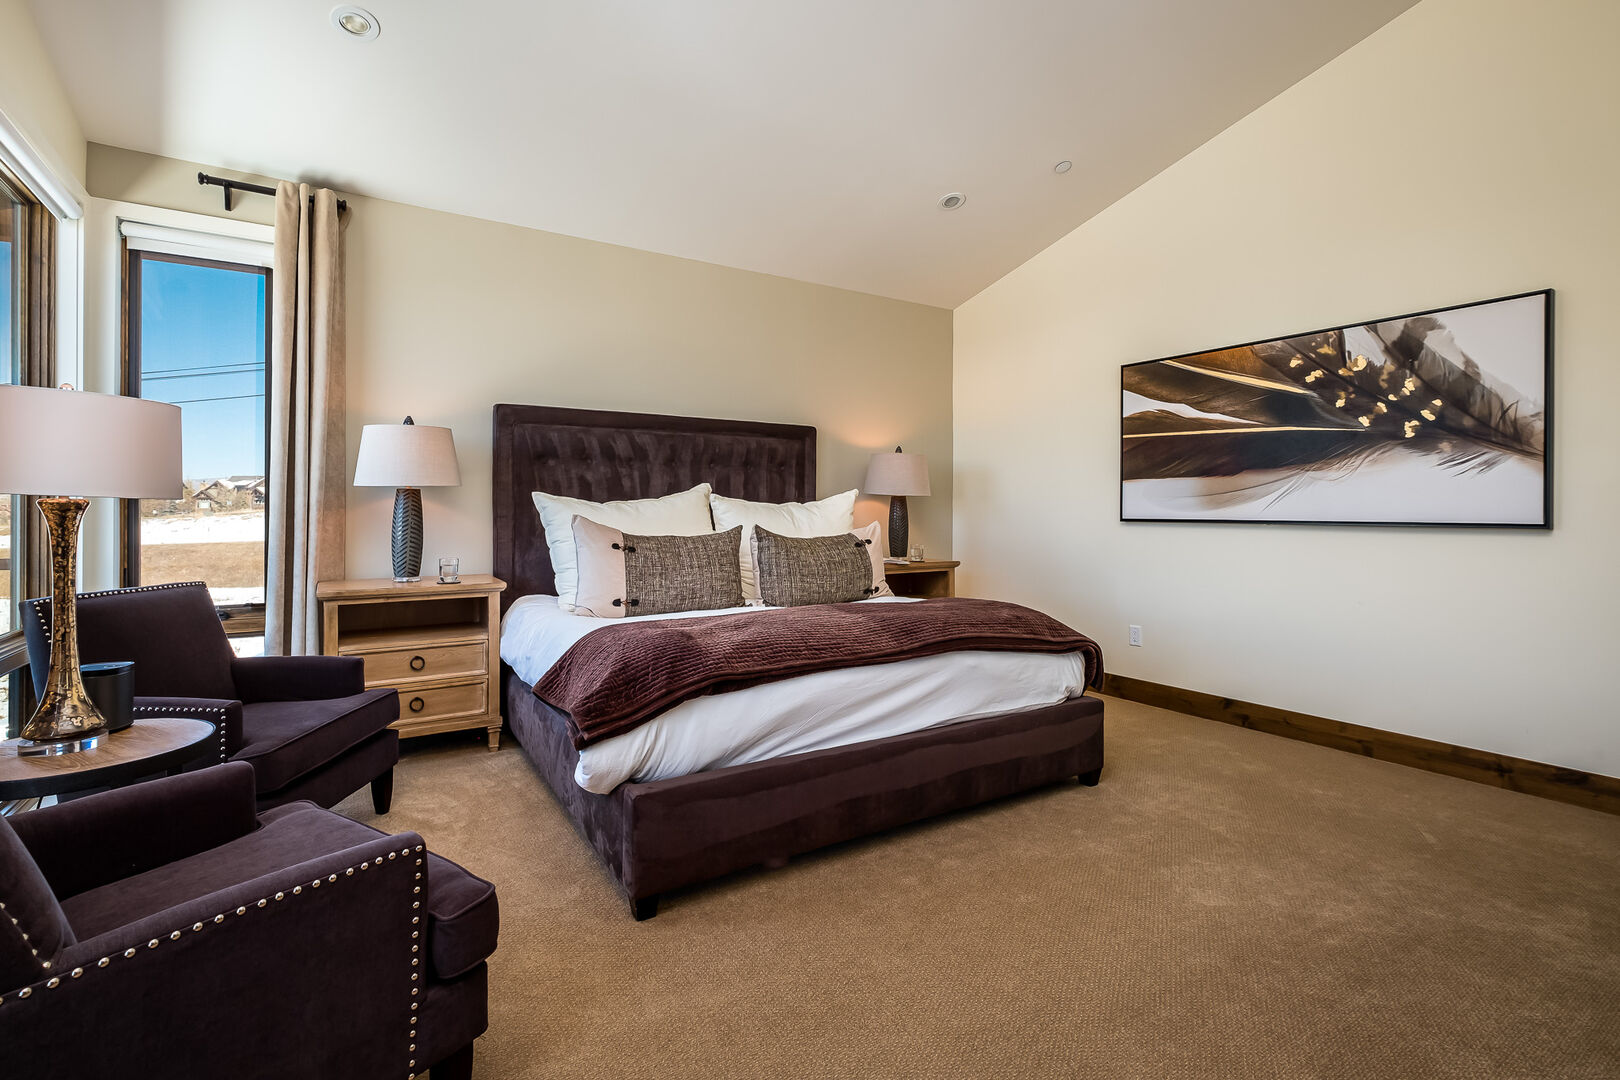 Total comfort and relaxation in our primary suite.